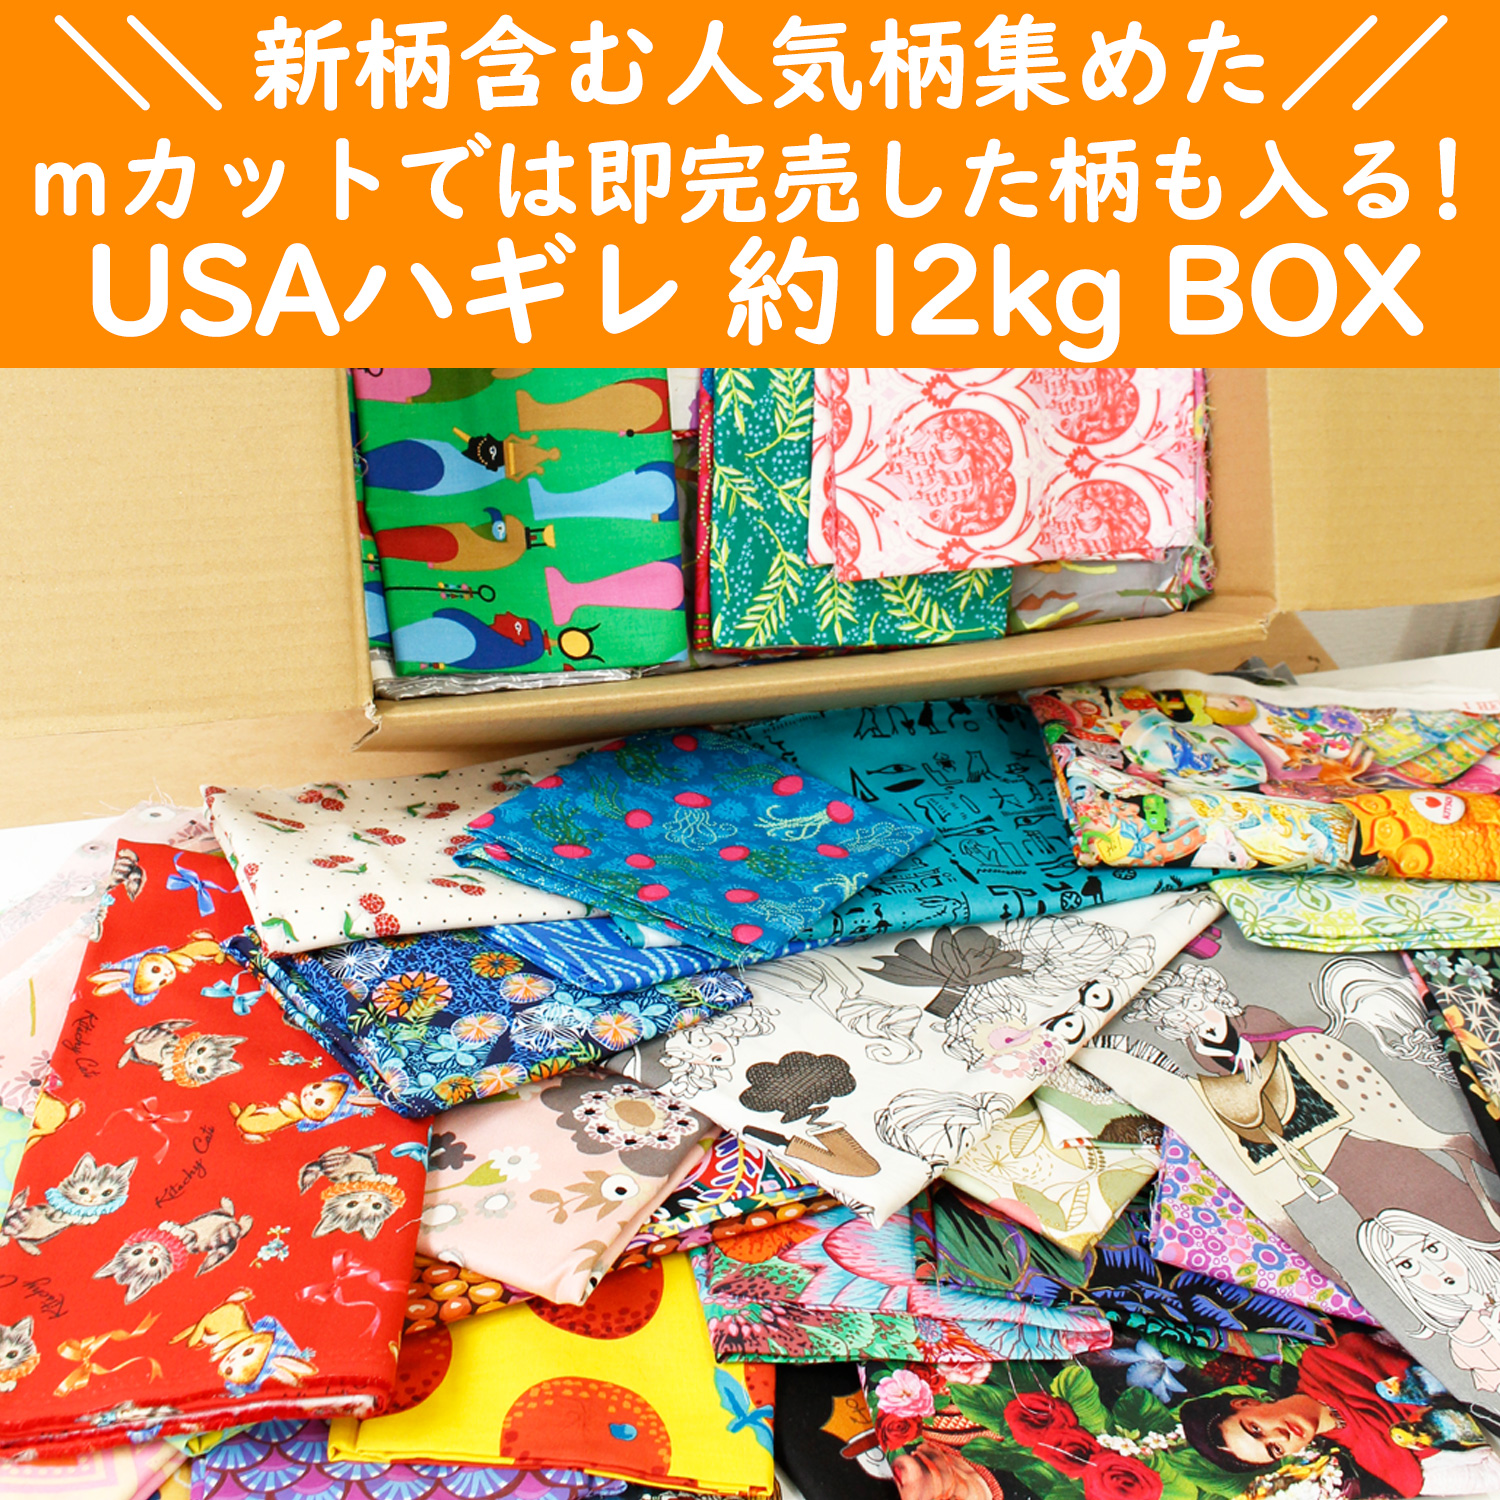 OR-SET33000 Import Fabric from USA 12kg tear box (box)